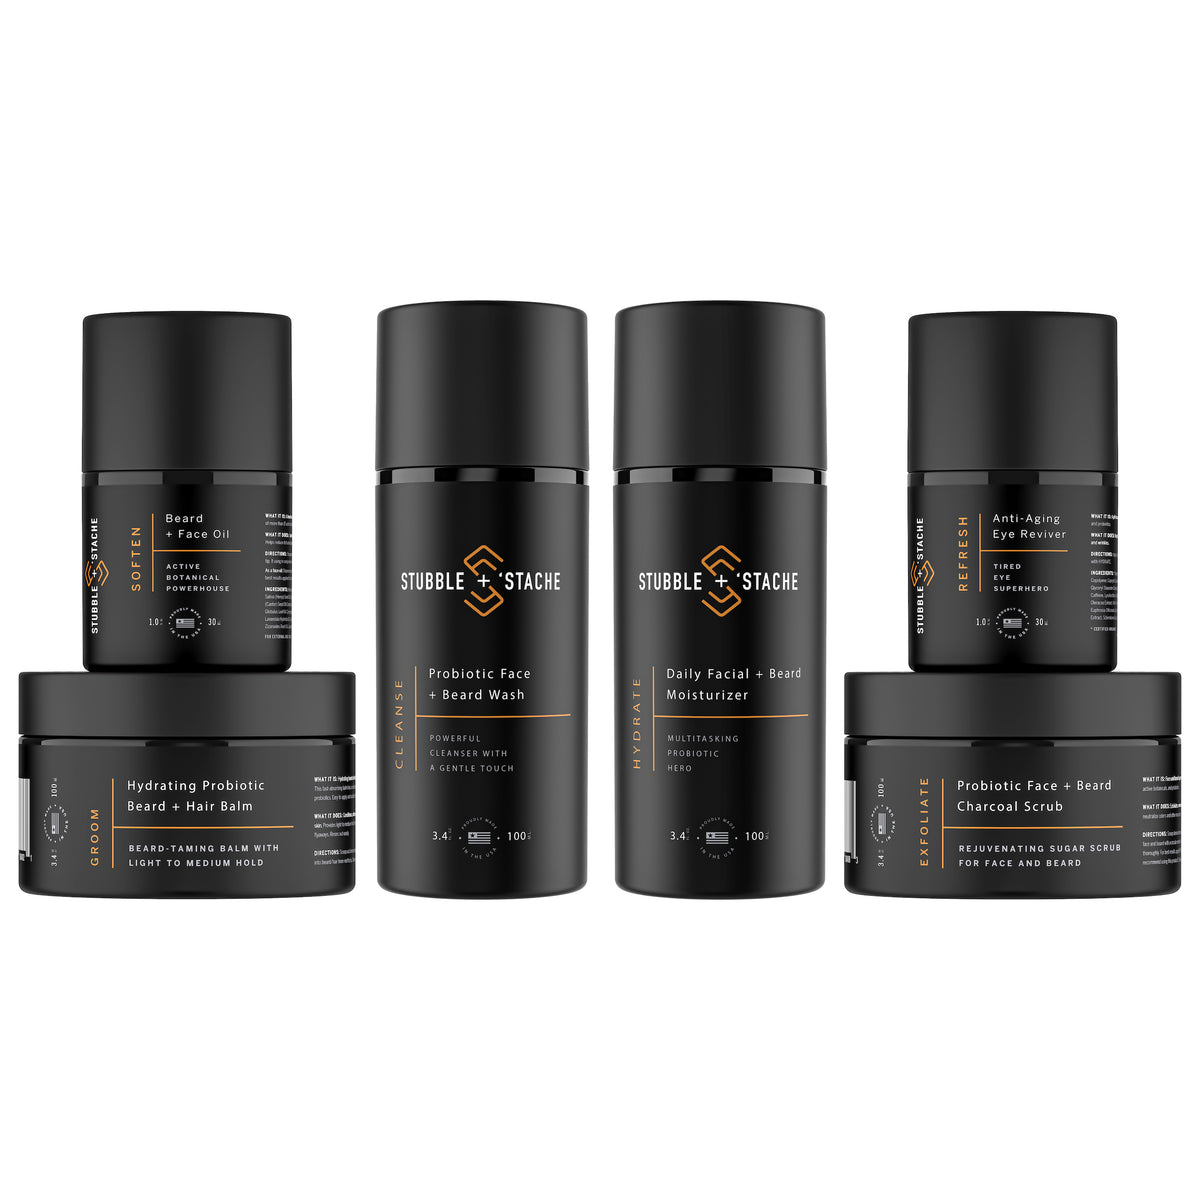 The Complete Men&#39;s skin care and beard care set